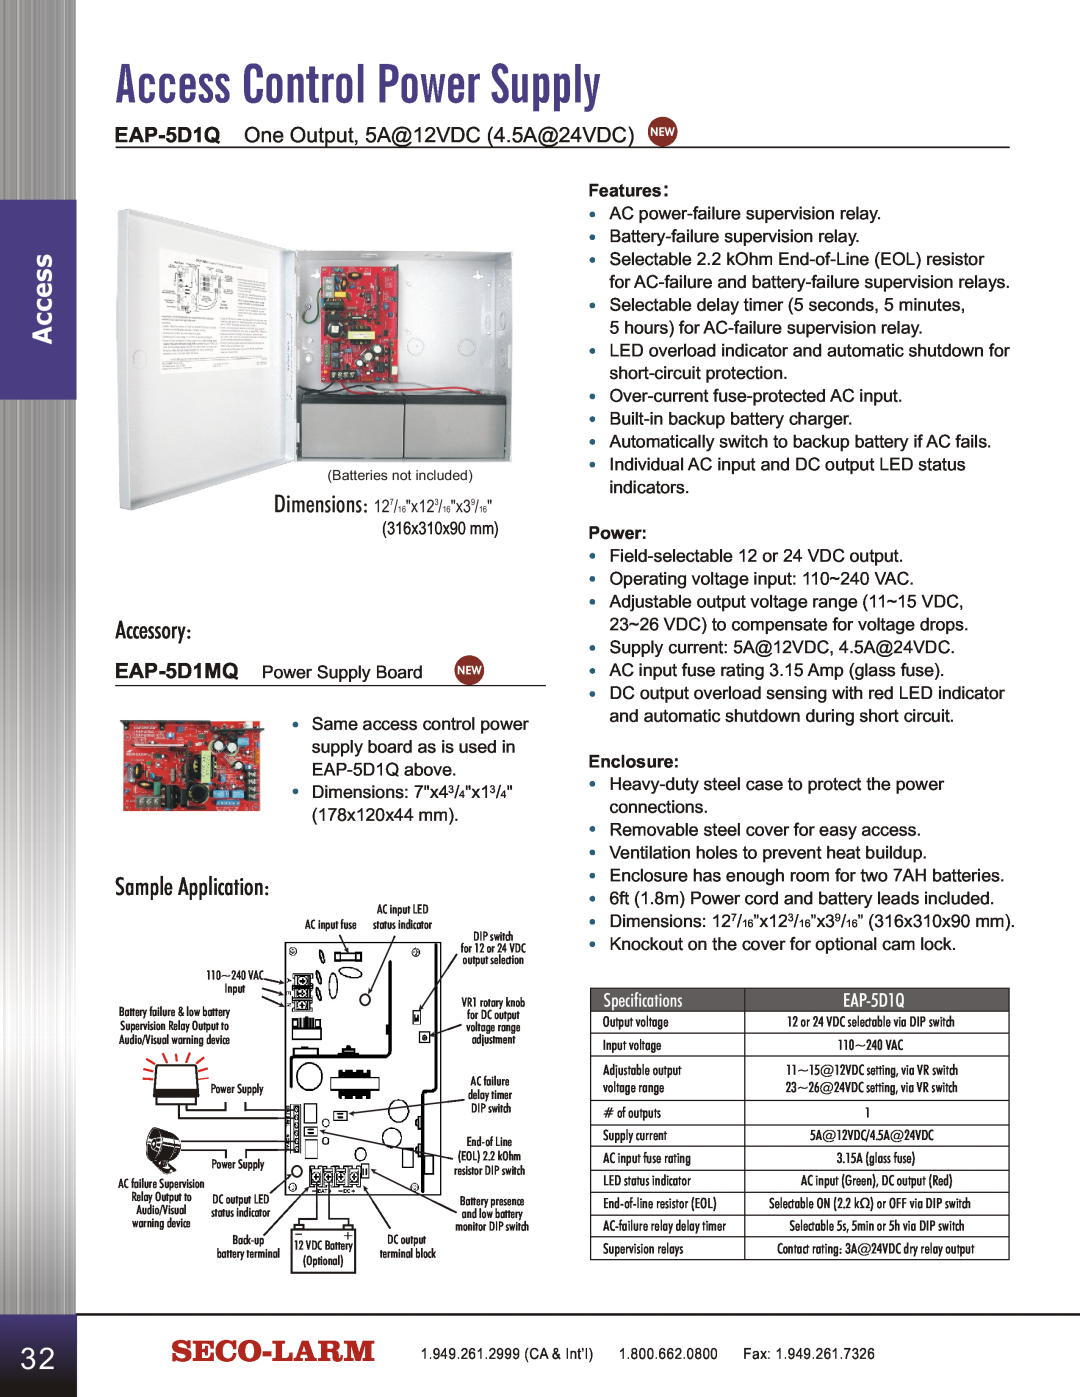 SECO-LARM USA SD-C141S manual Access Control Power Supply, Accessory, Sample Application, Specifications 